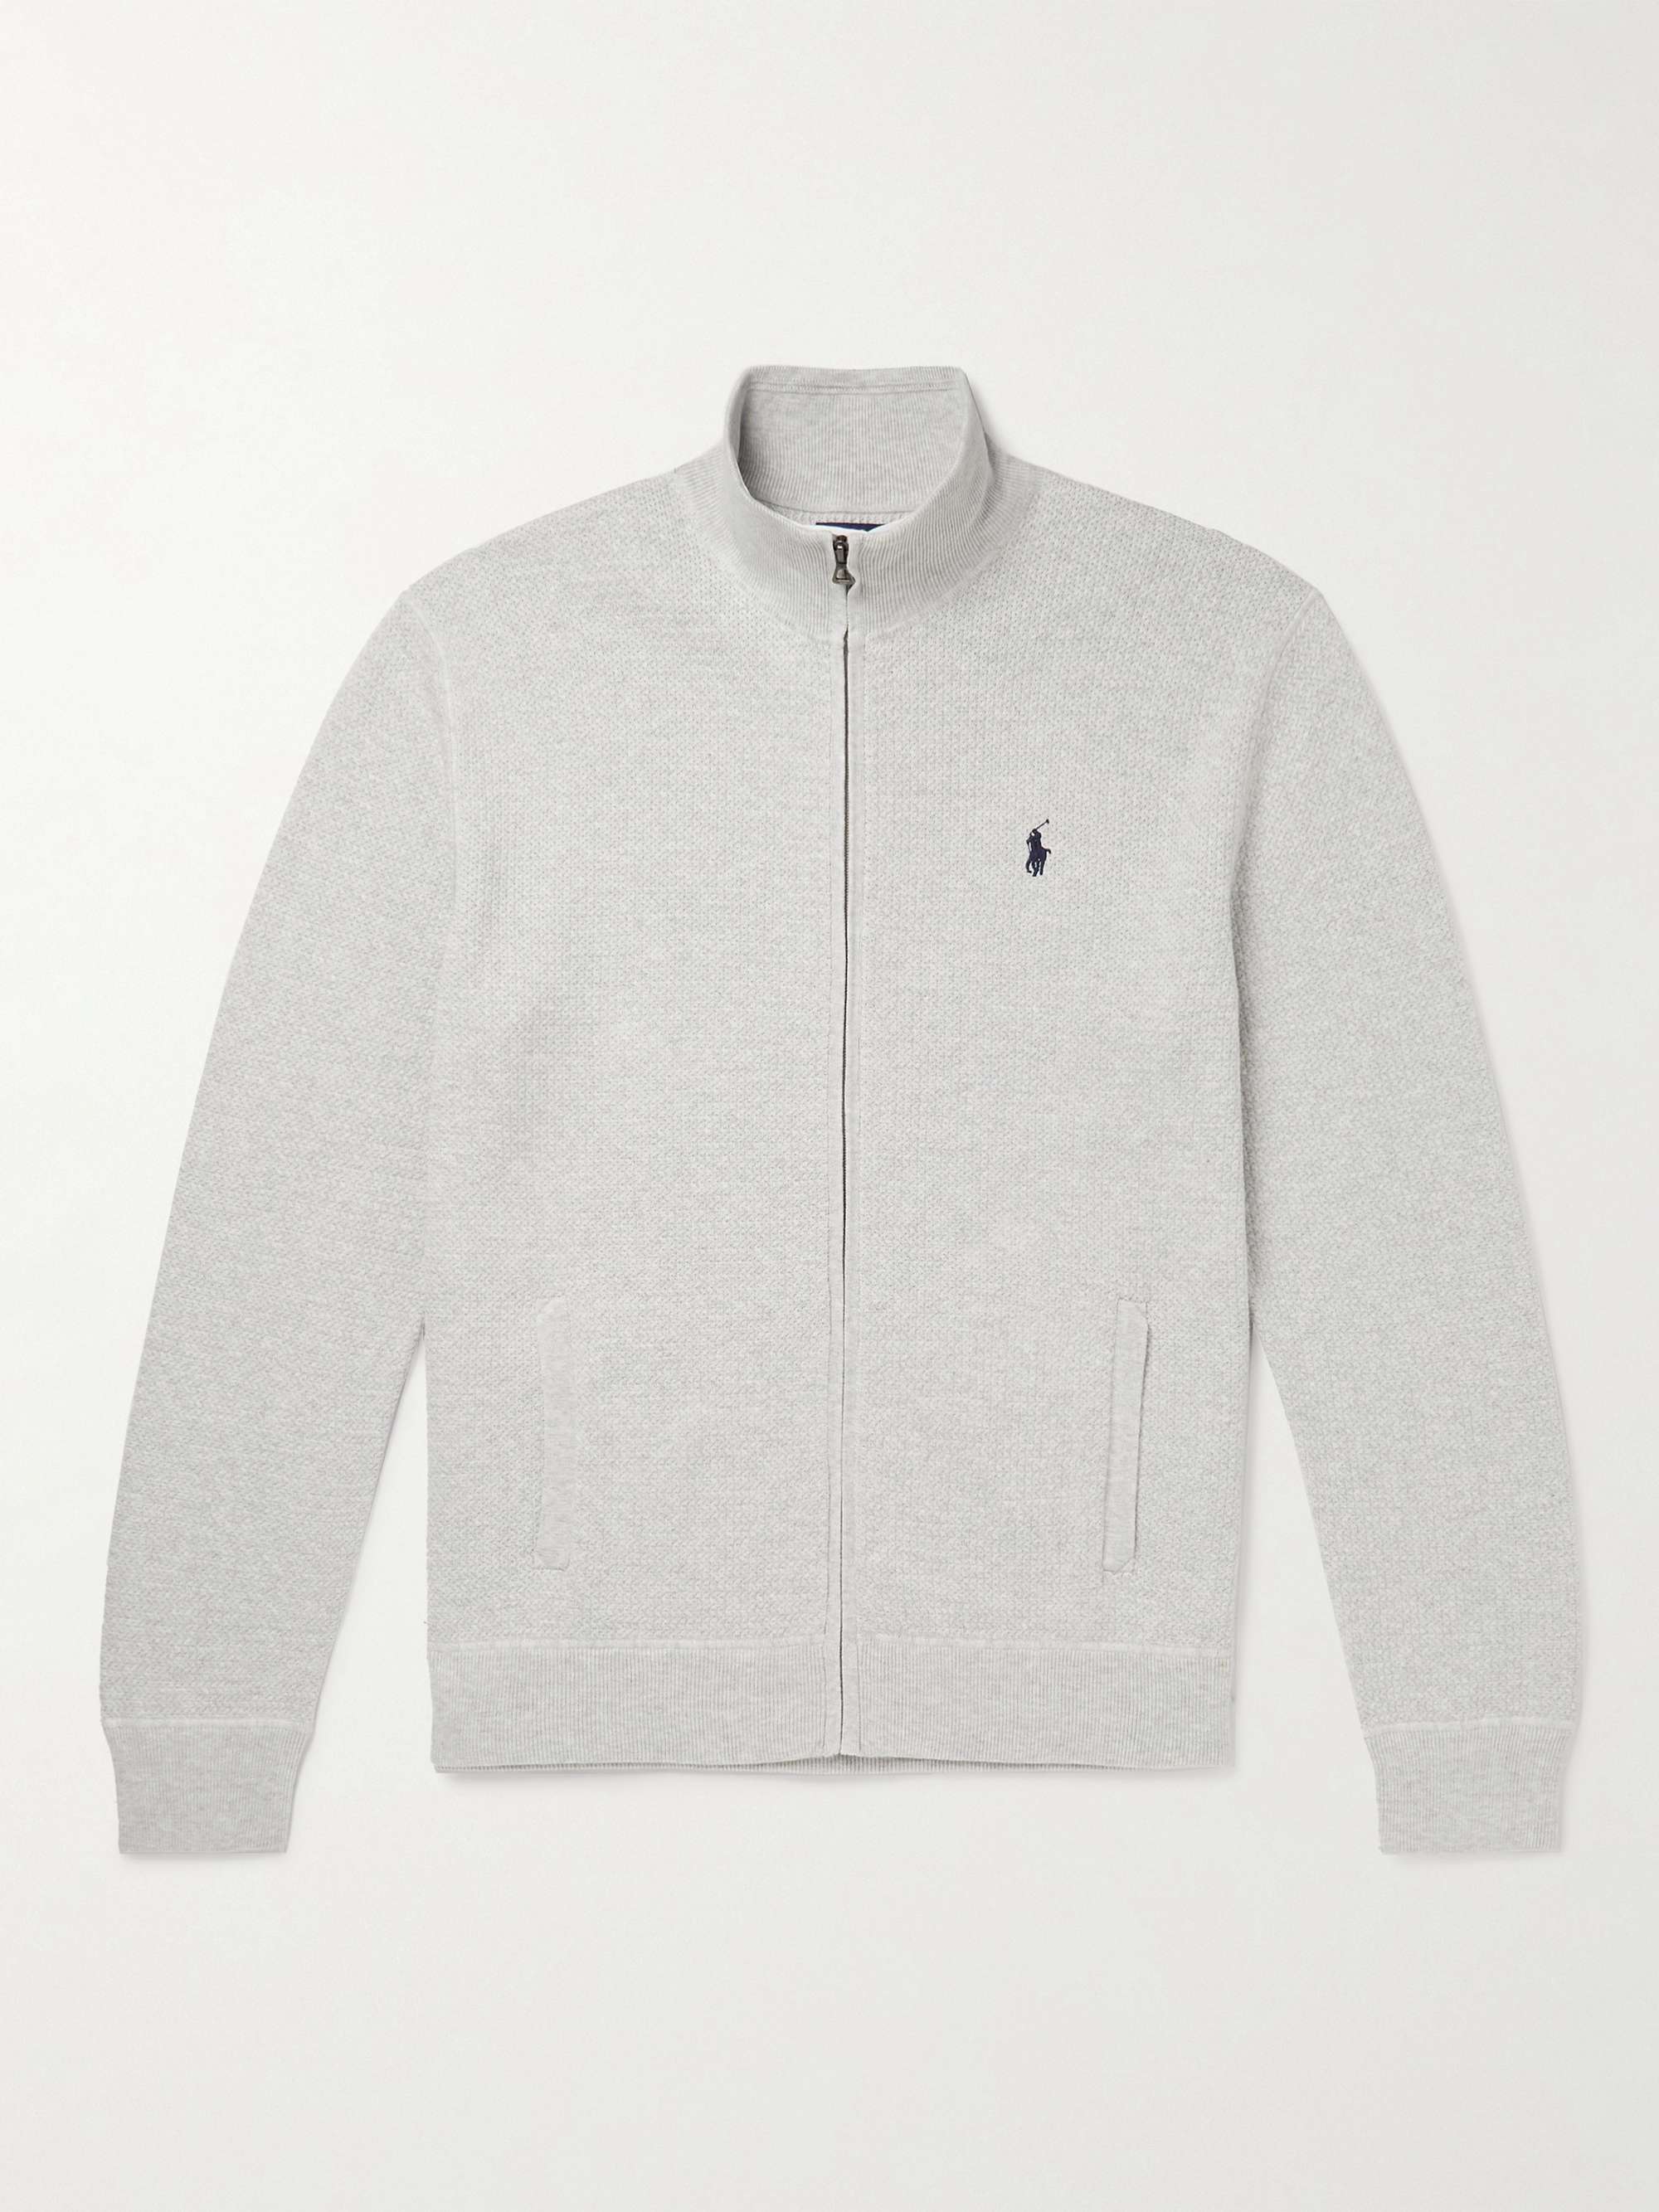 POLO RALPH LAUREN Logo-Embroidered Cotton Zip-Up Sweater